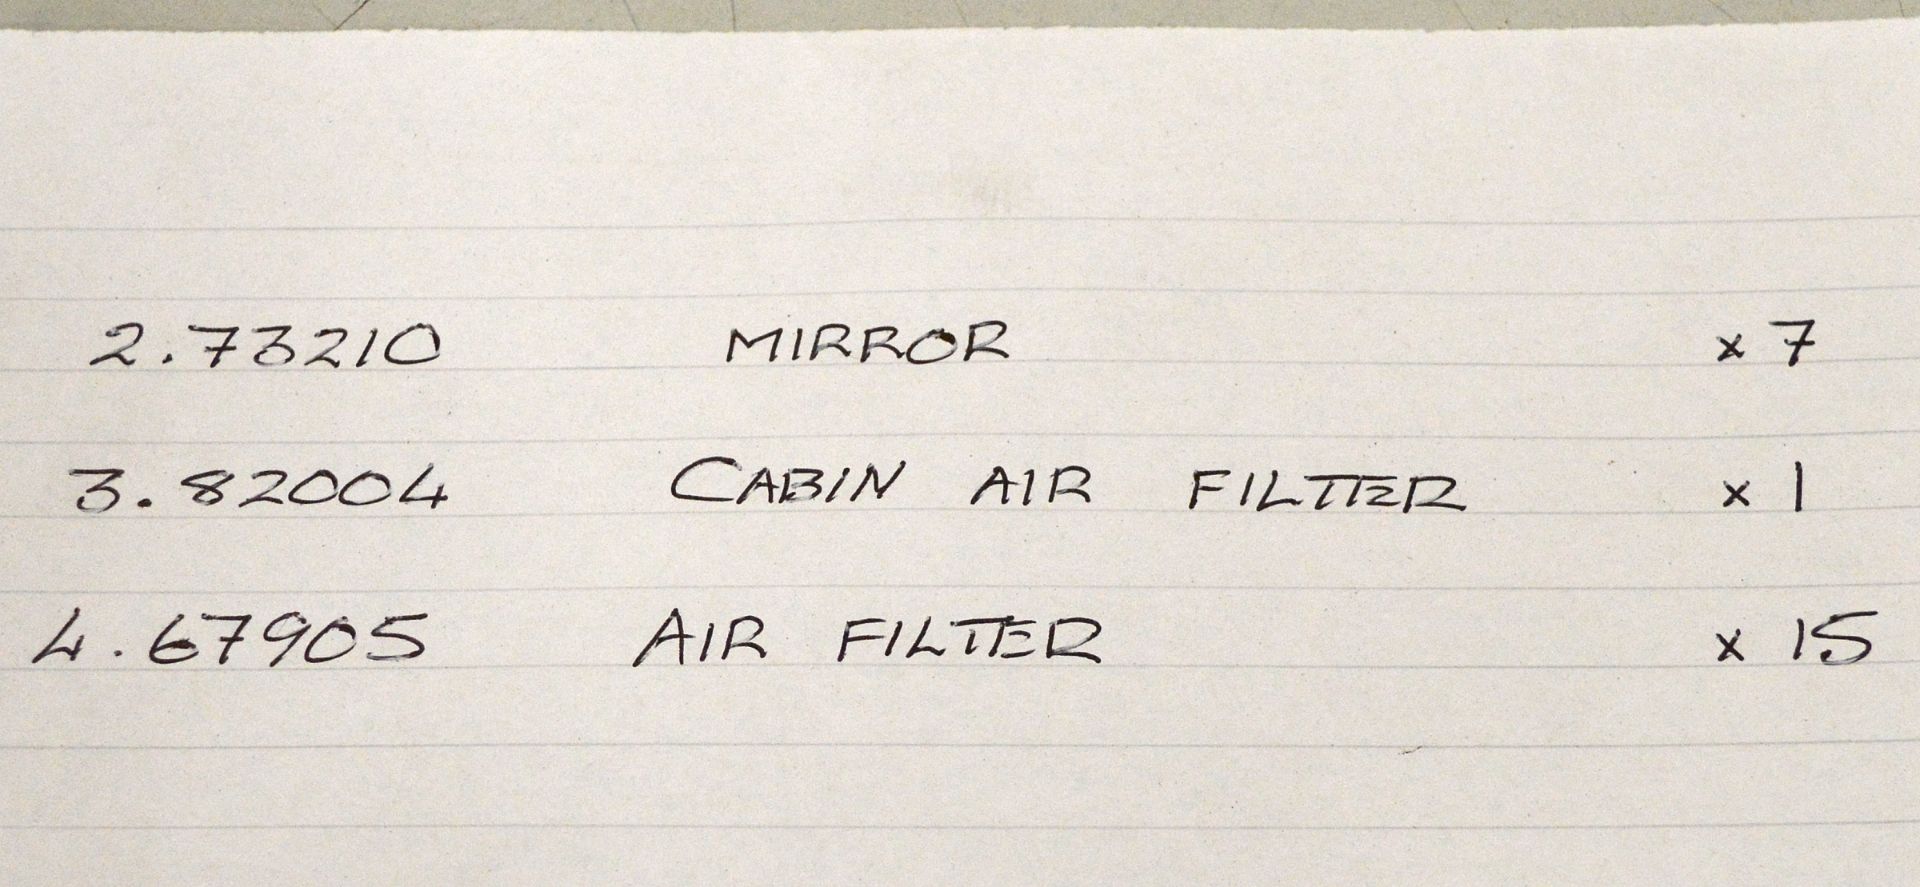 Vehicle parts - mirrors, cabin filters, air filters - see picture for itinerary for model - Image 6 of 6